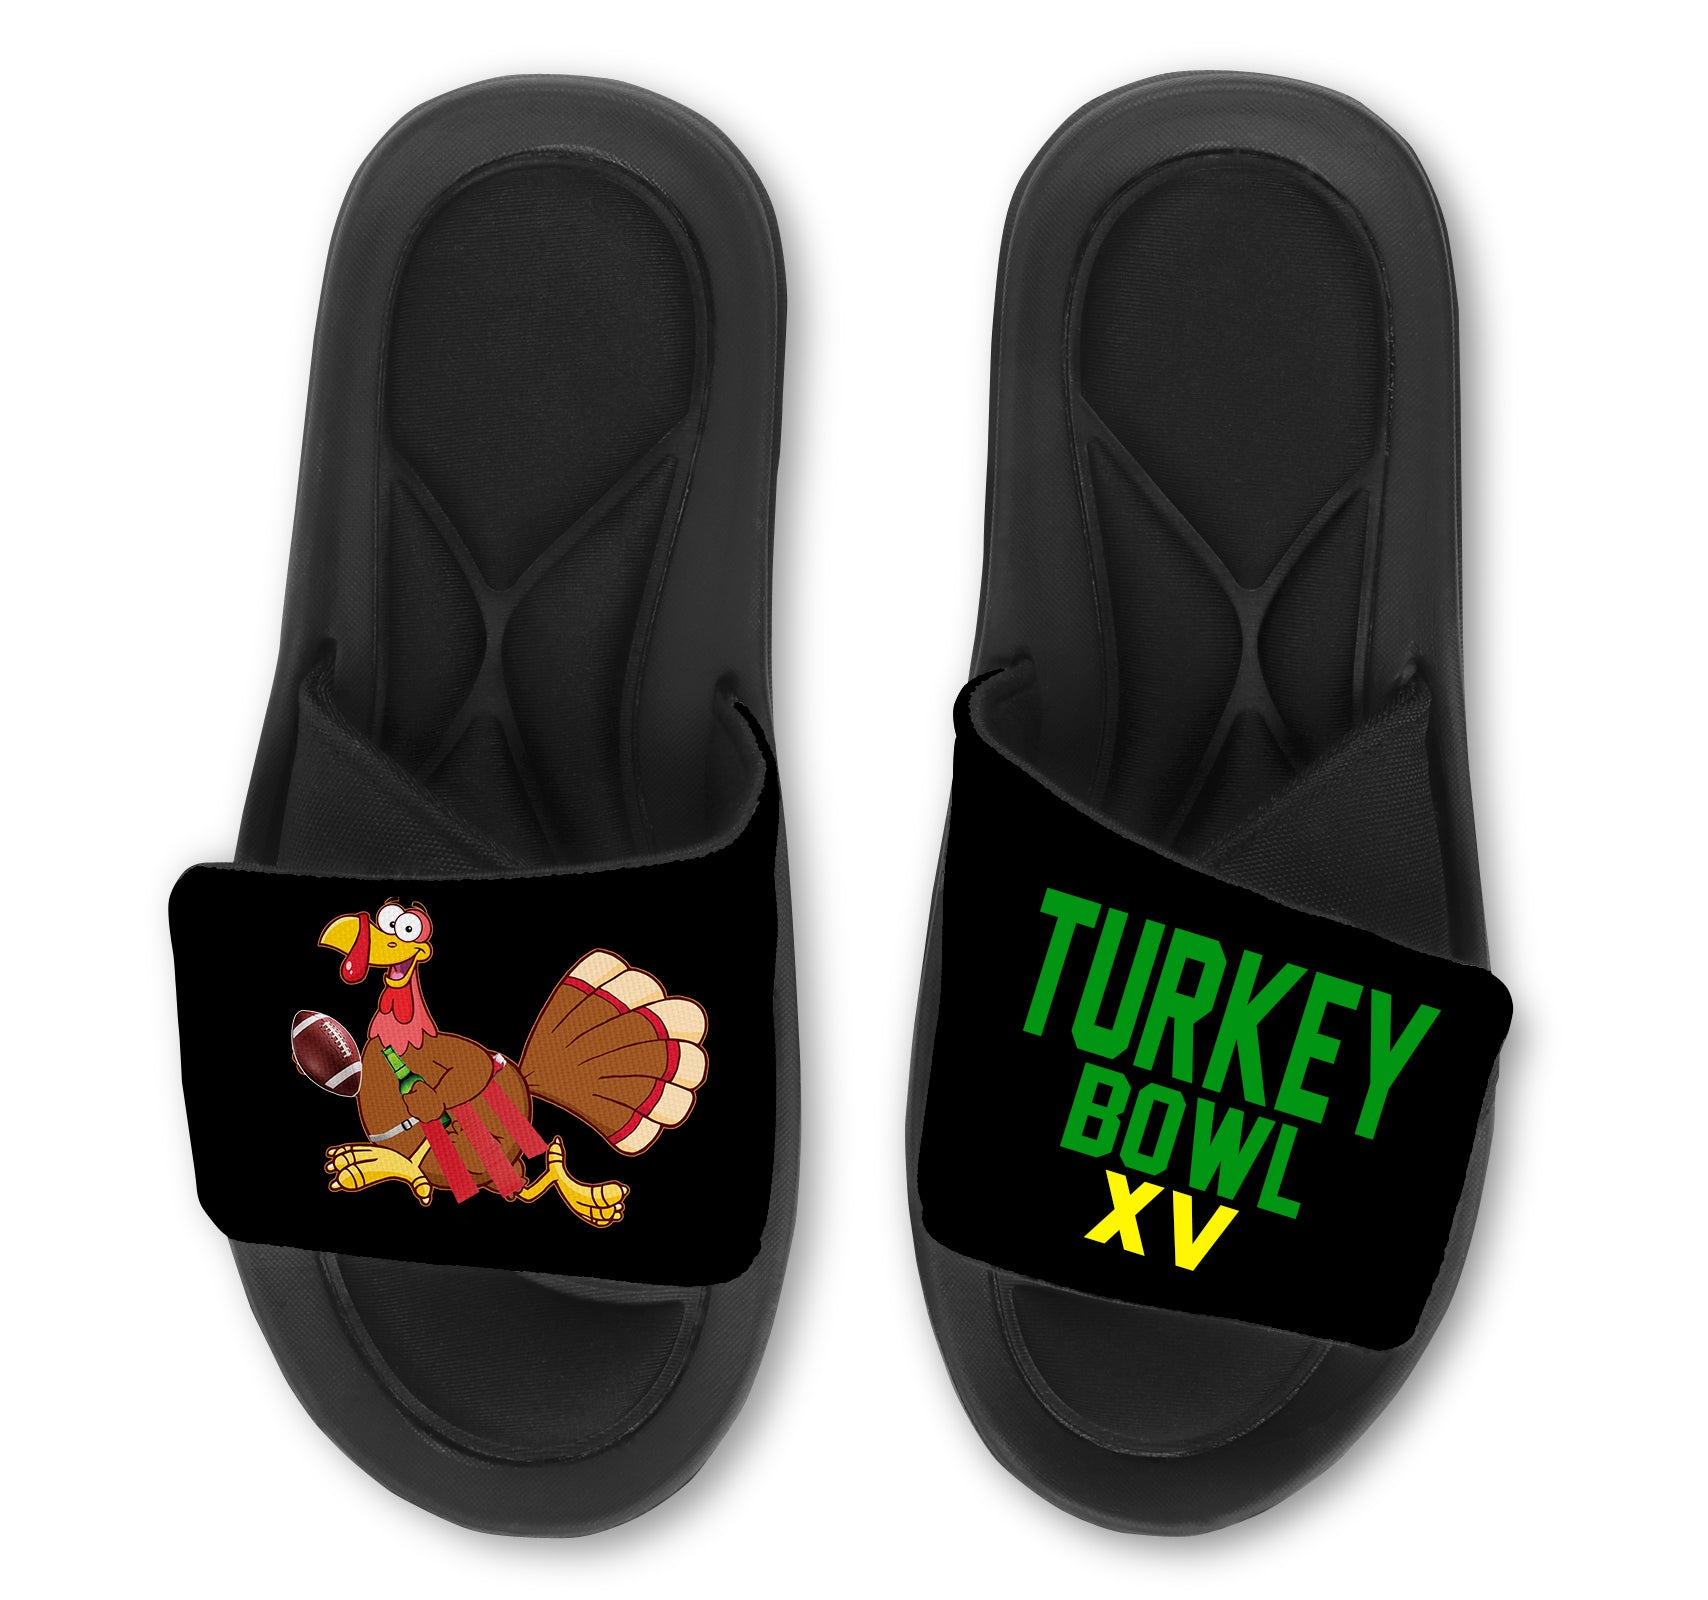 Custom Personalized Slides - Customize with Your Information!